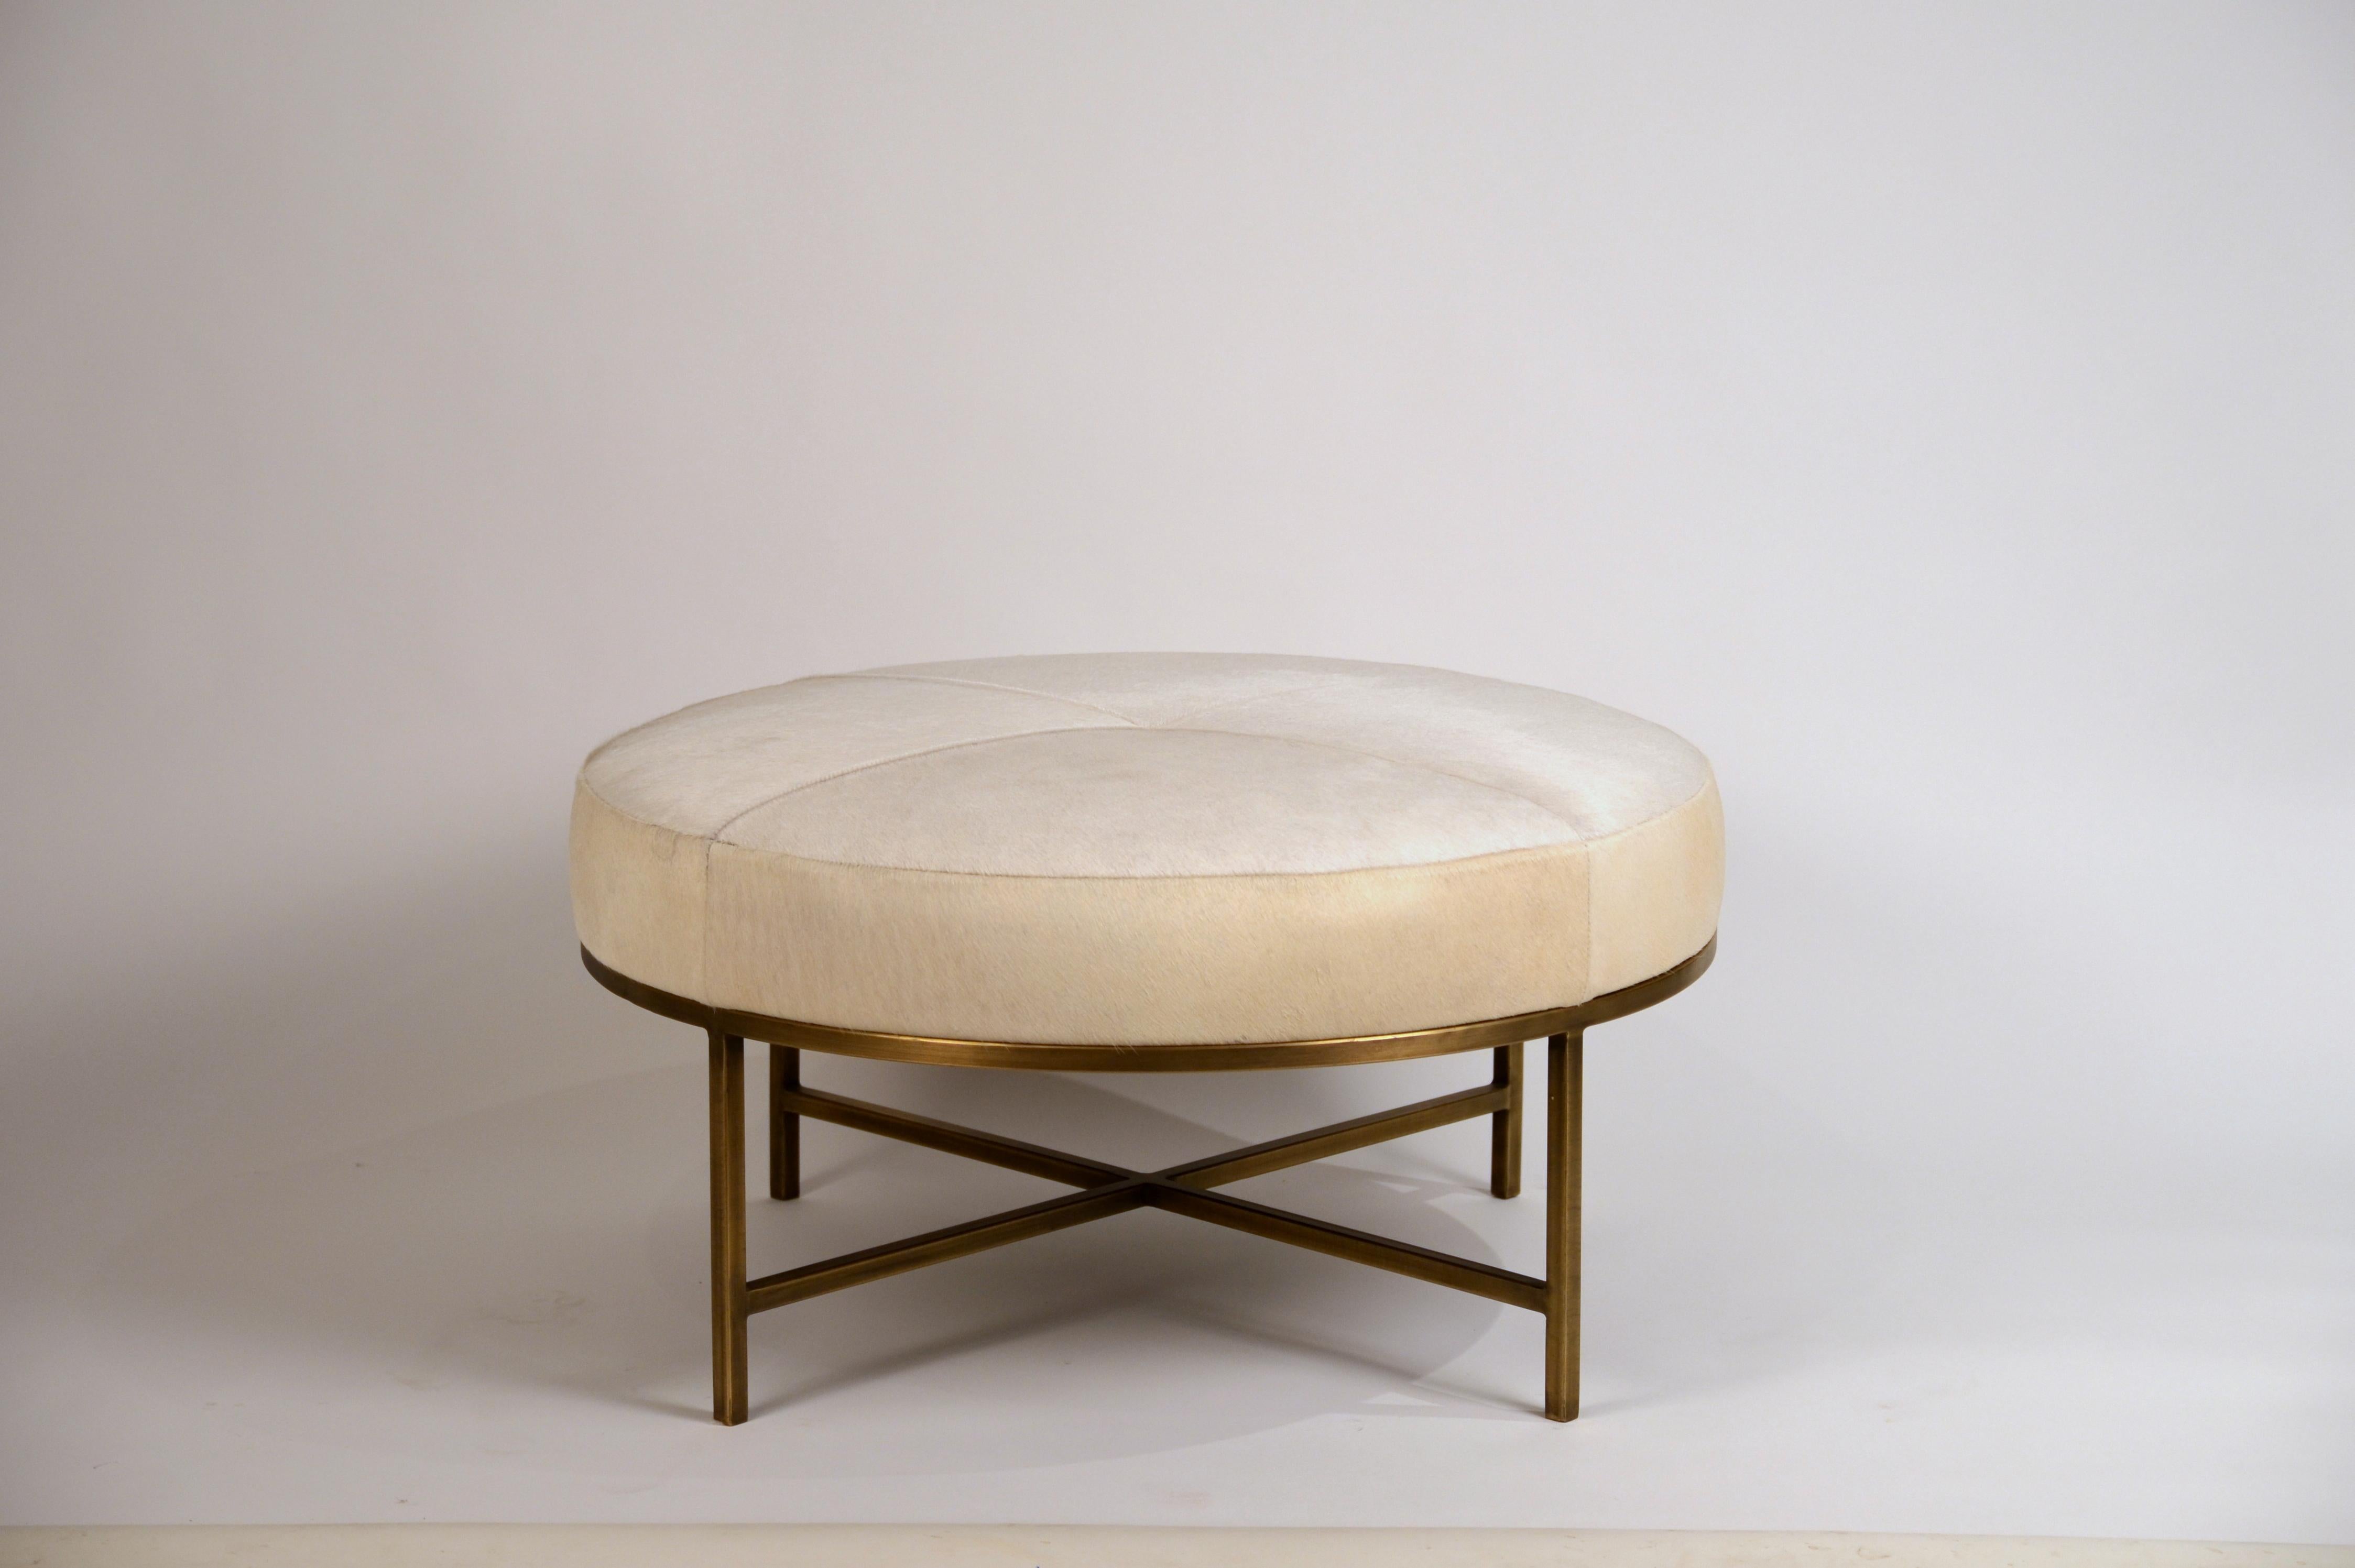 Small white hide and patinated brass 'Tambour' Ottoman by Design Frères.

Perfect as a coffee table in the living room, a den or a media room.

Brass plated and patinated steel base with hand stitched natural white cream / ivory / white hide